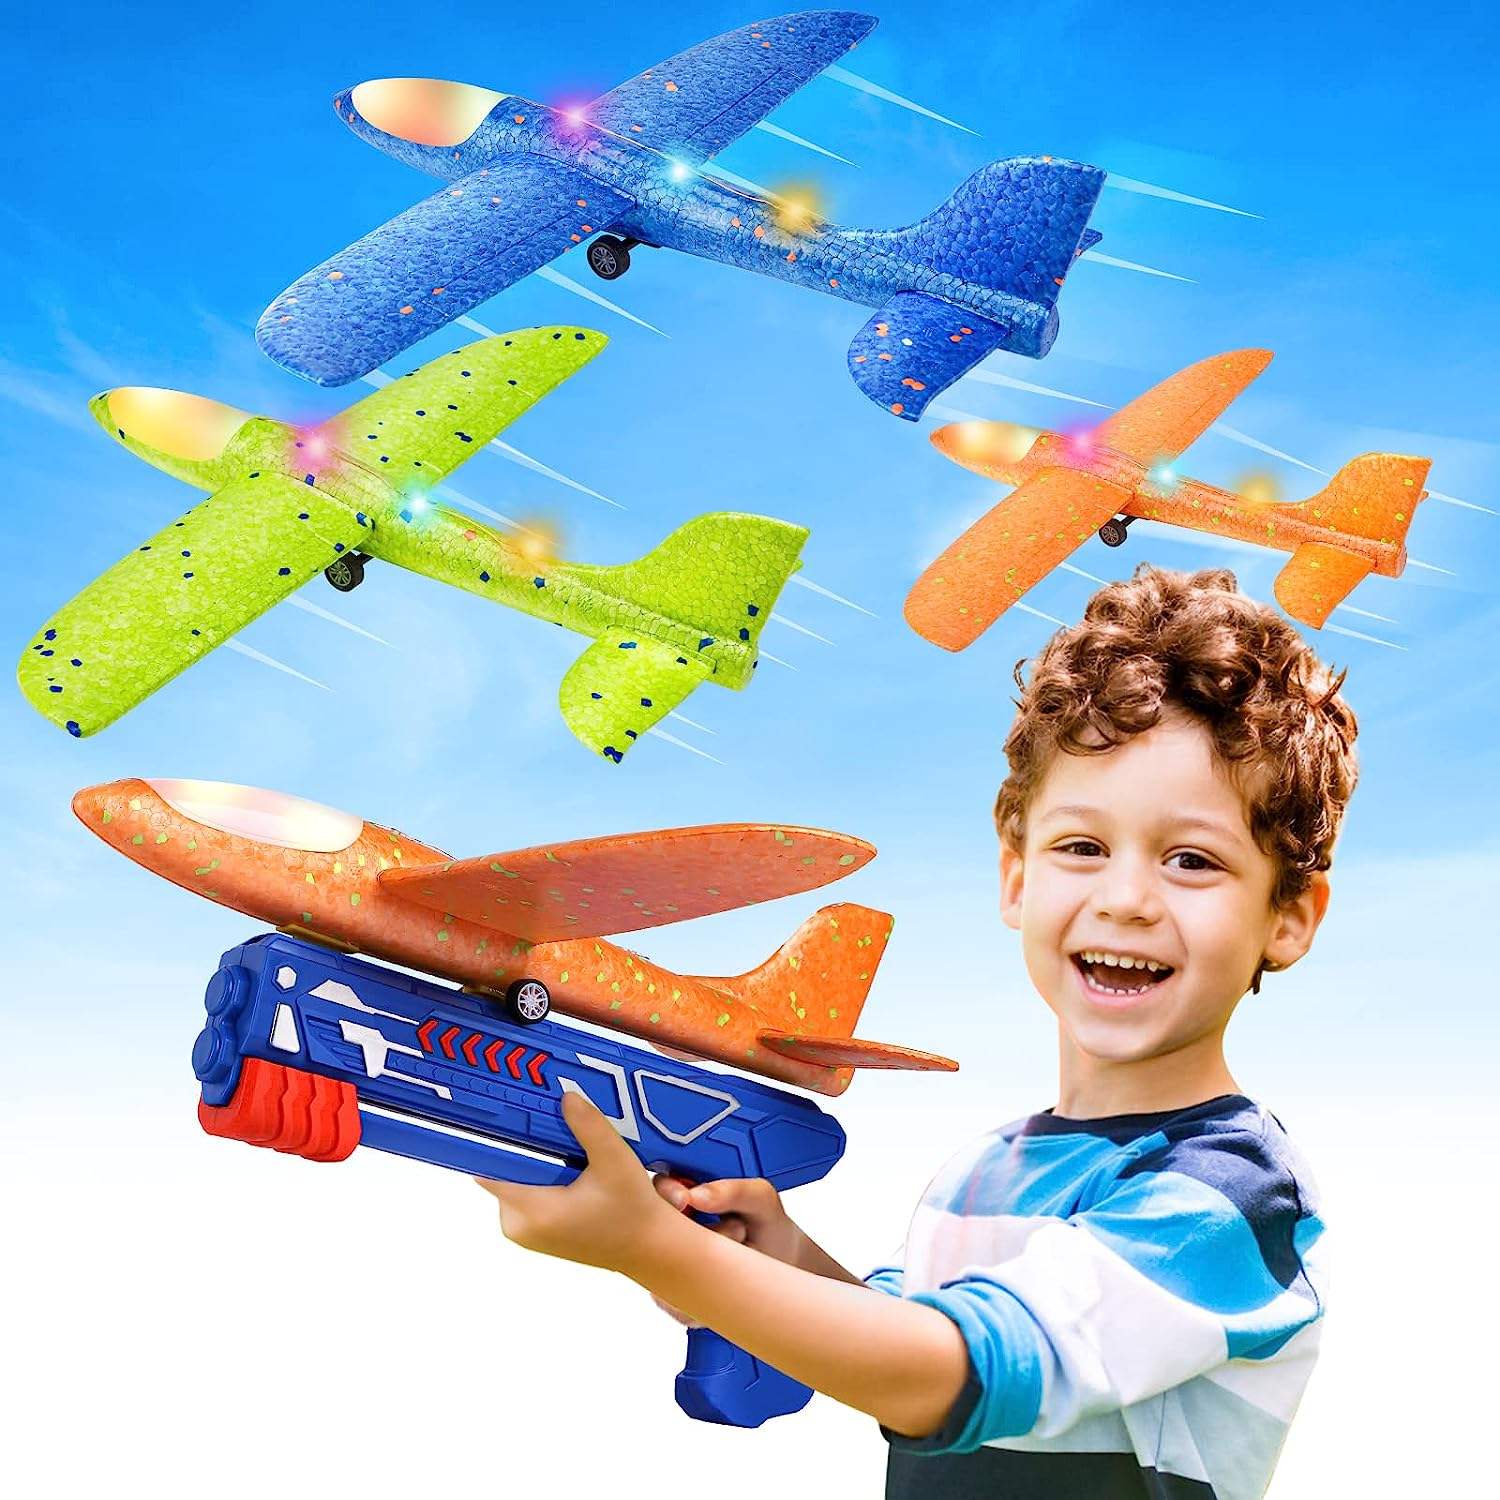 Introducing the Hottest Outdoor Product: Airplane Launcher Toys